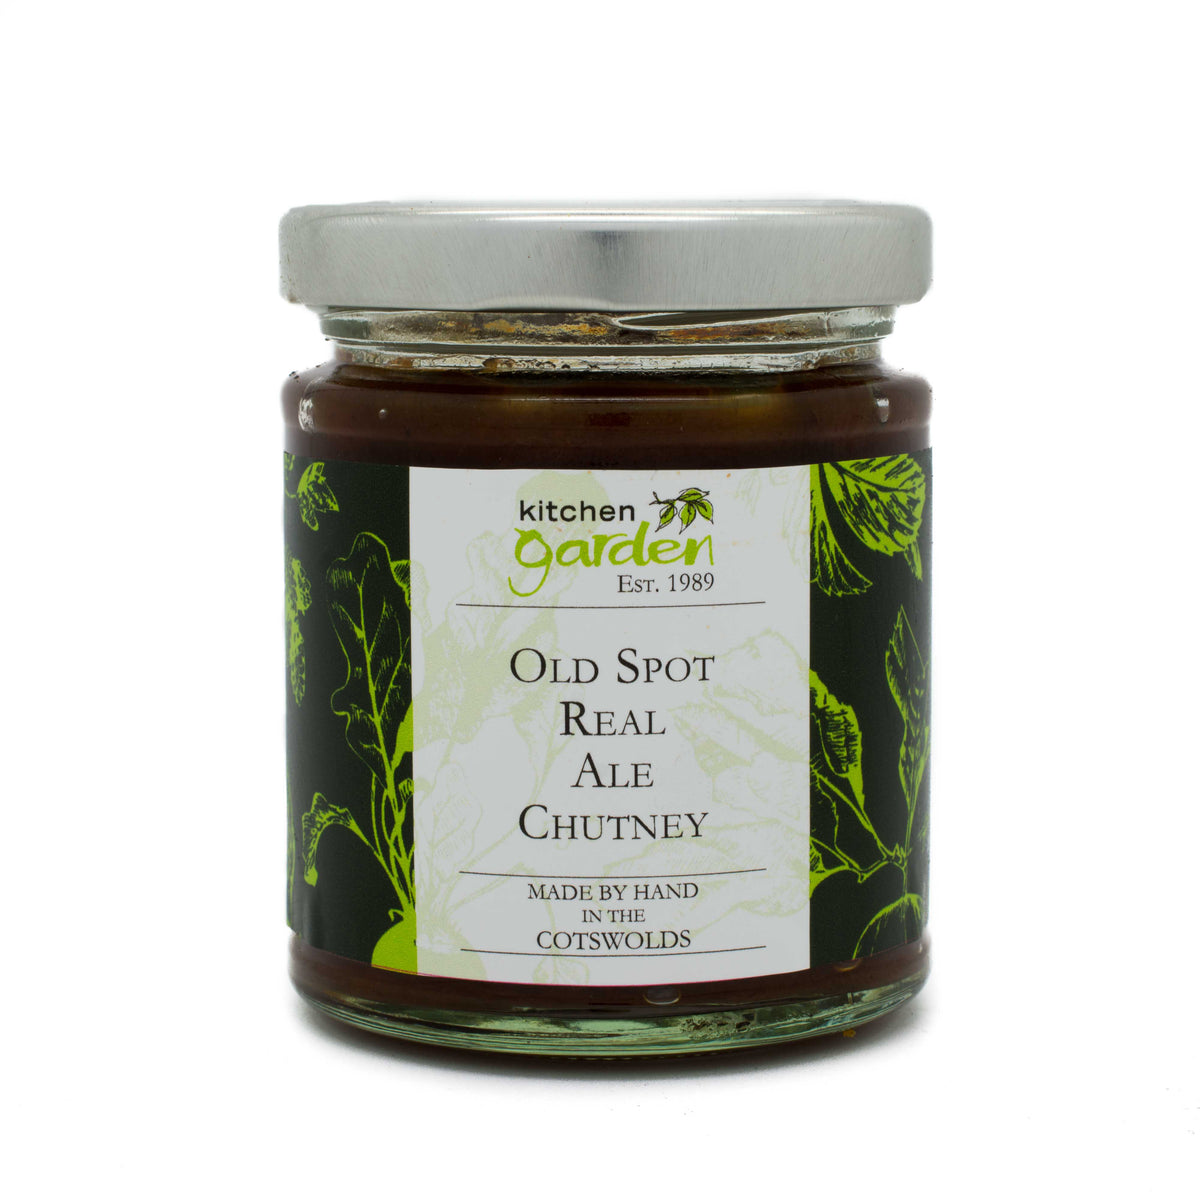 Kitchen Garden Old Spot Real Ale Chutney. The Trethowan Brothers